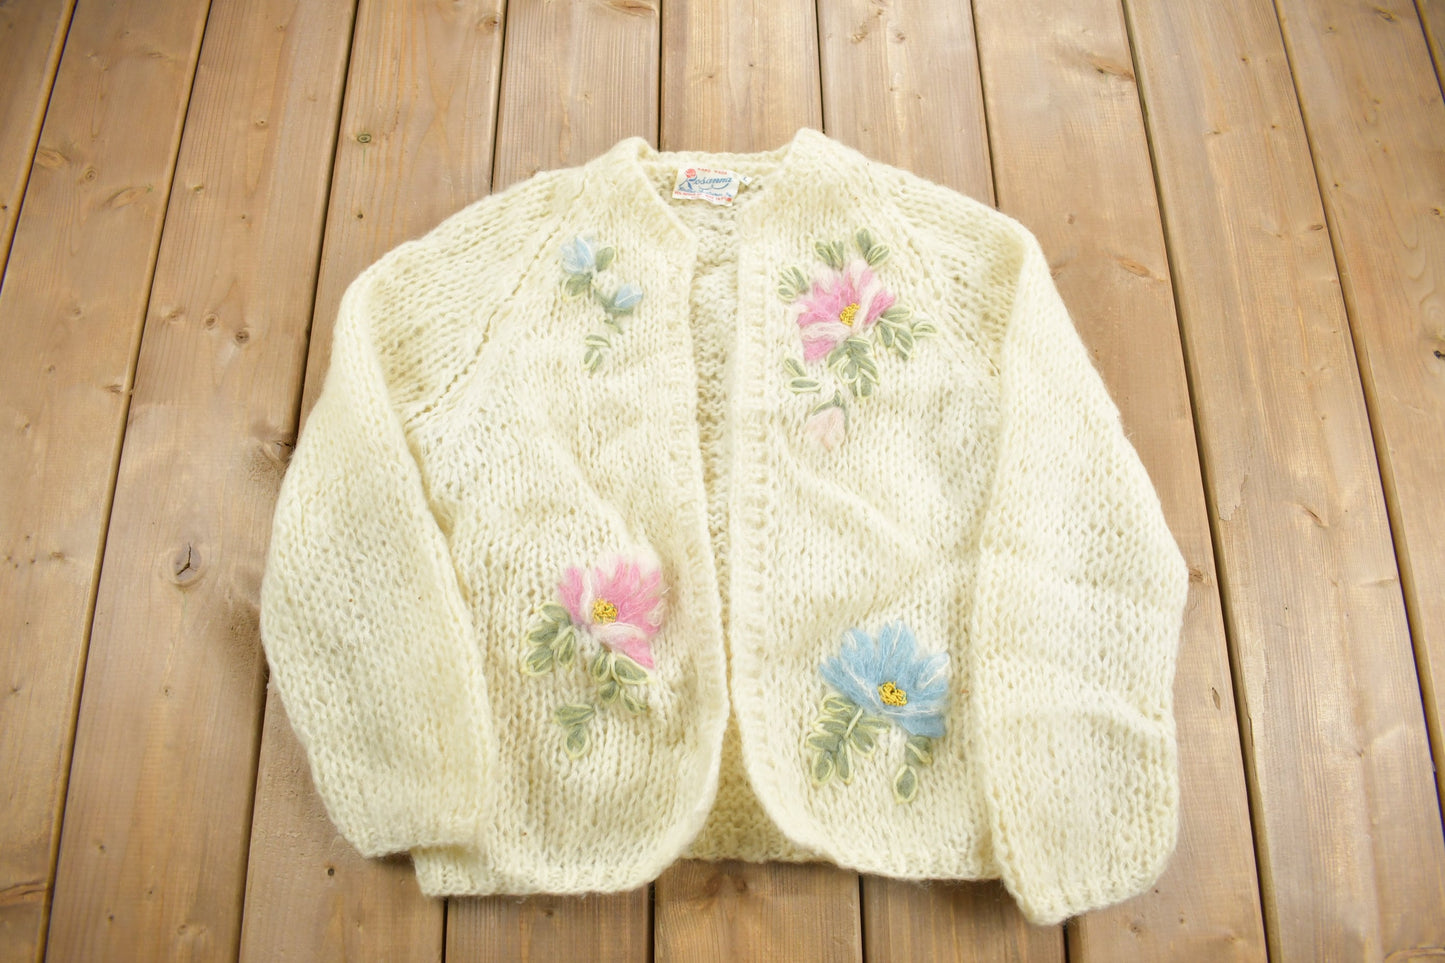 Vintage 1970s Rosanna Mohair Wool Blend Knit Sweater / Vintage 90s Crewneck / Made In Italy / Vintage Knit / Floral Embroidery